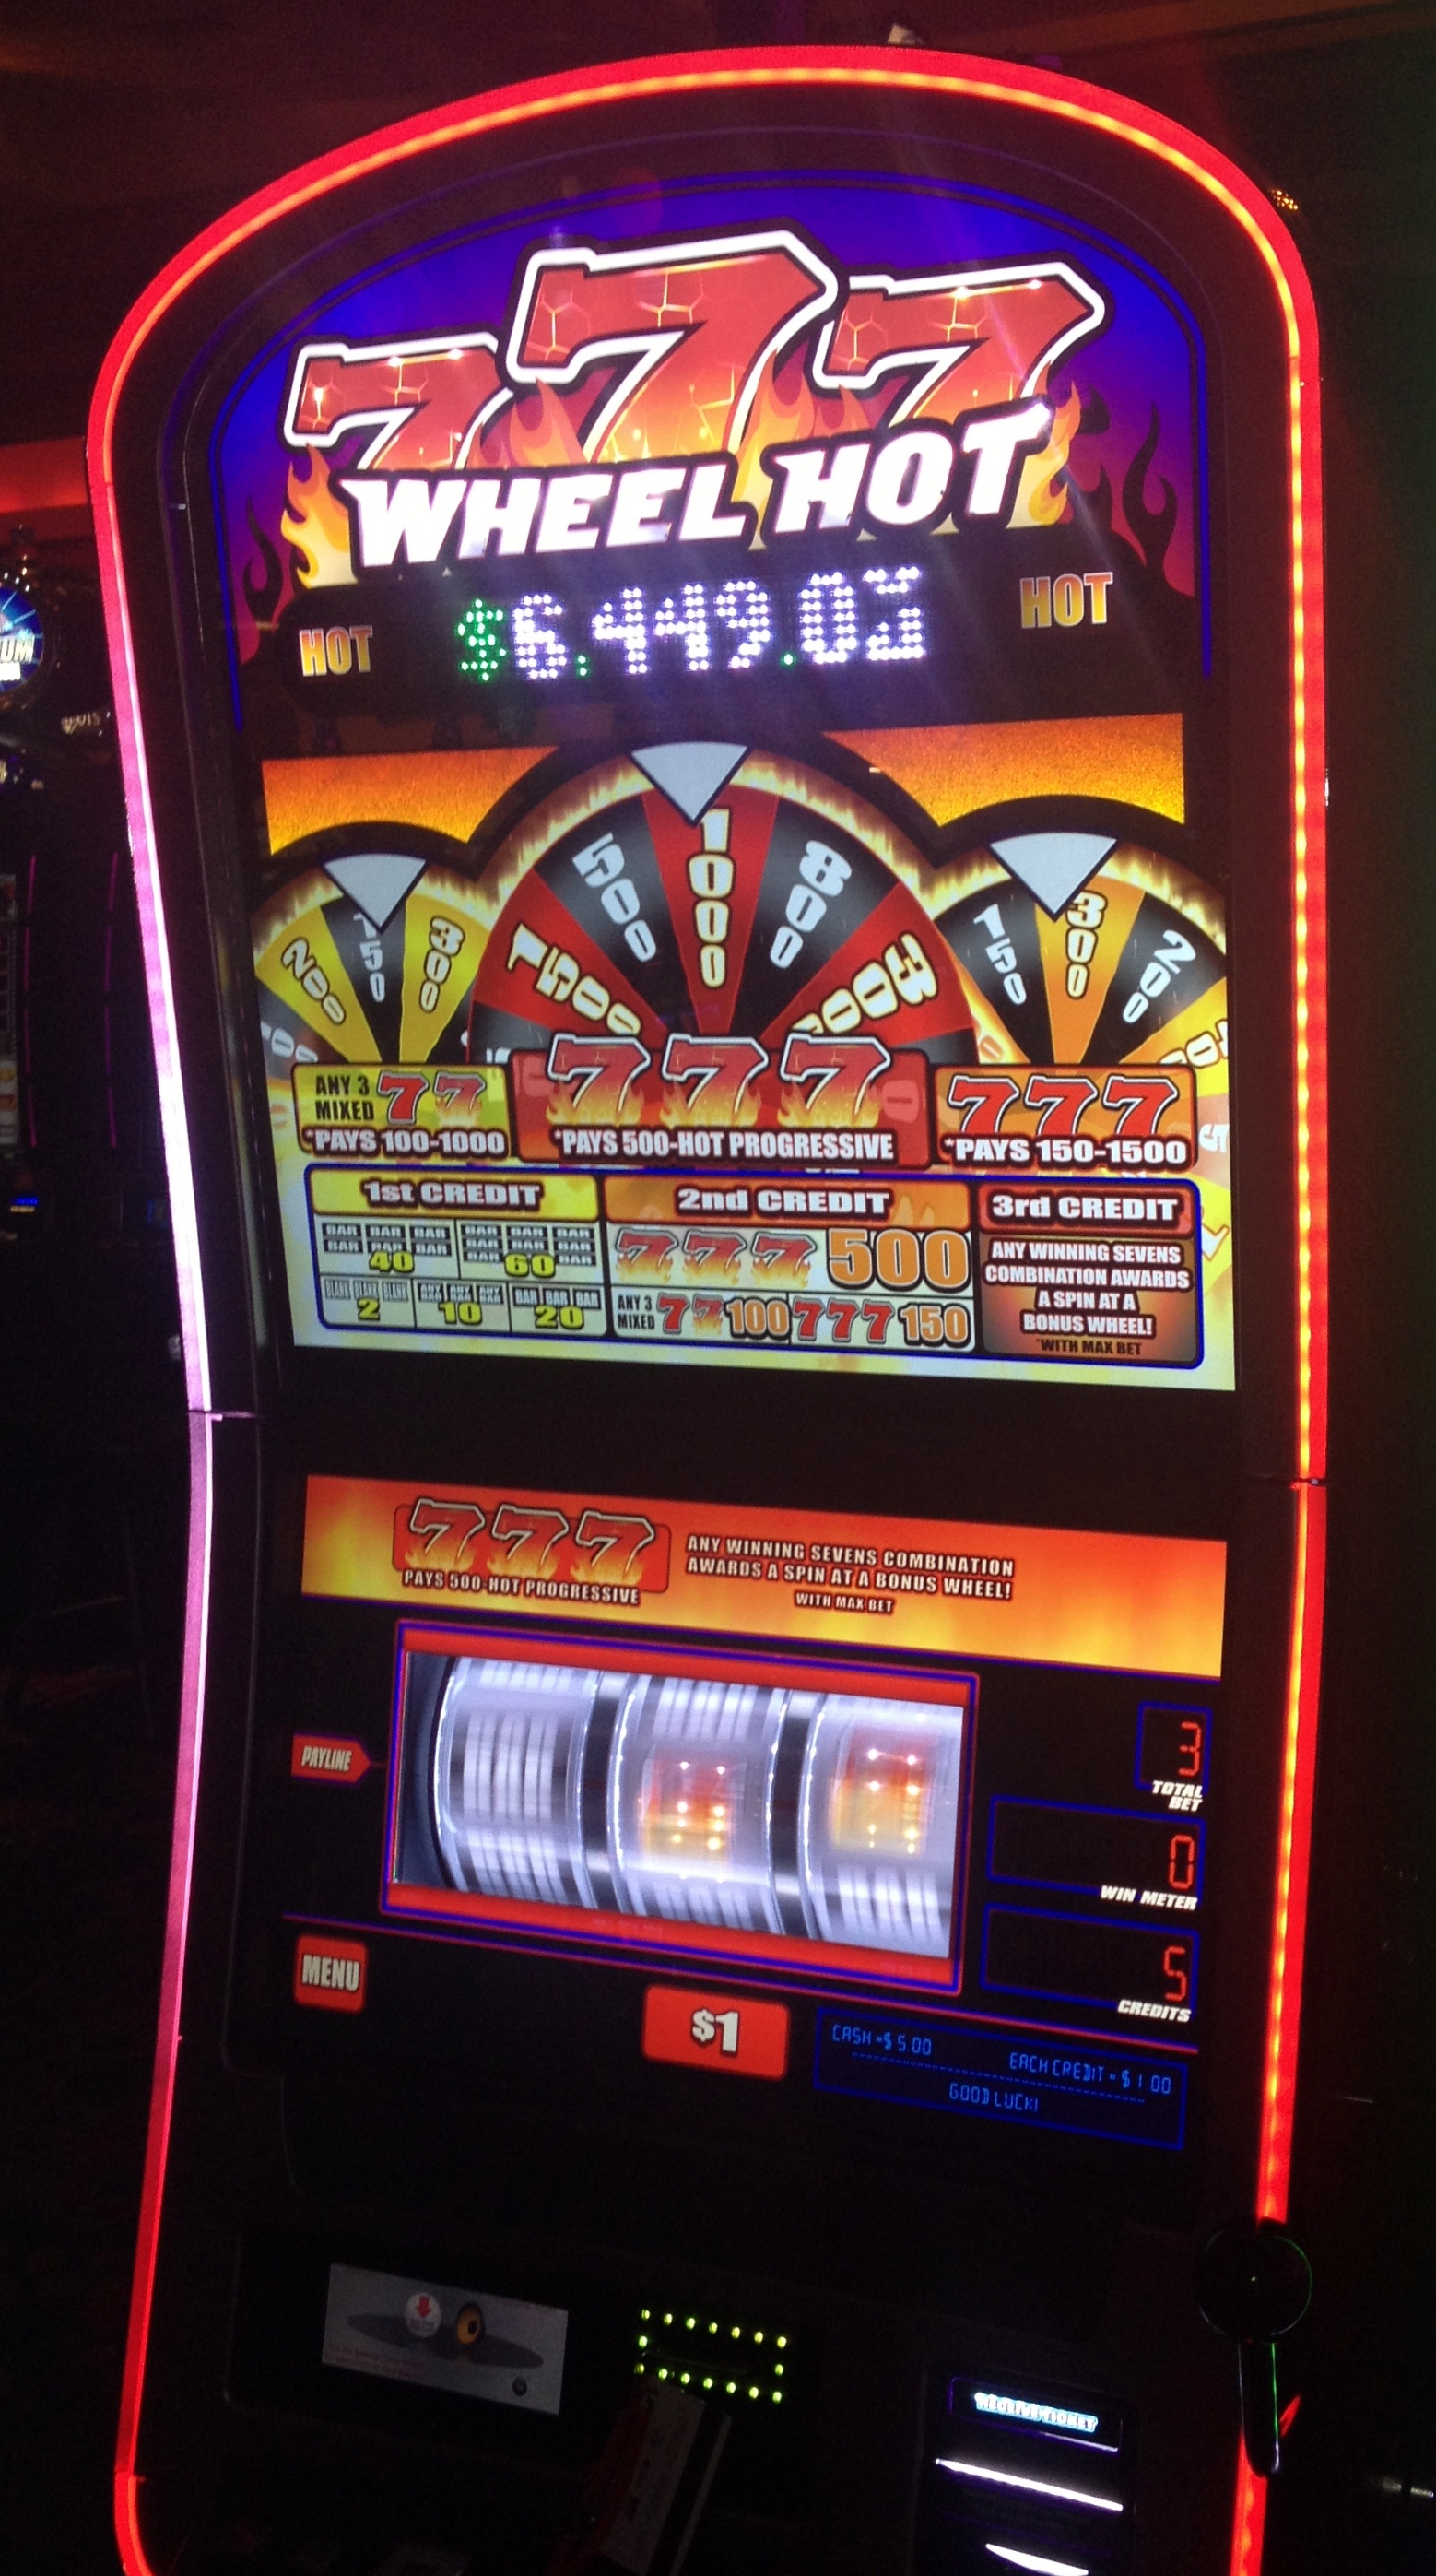 How to trigger jackpot on old slot machines